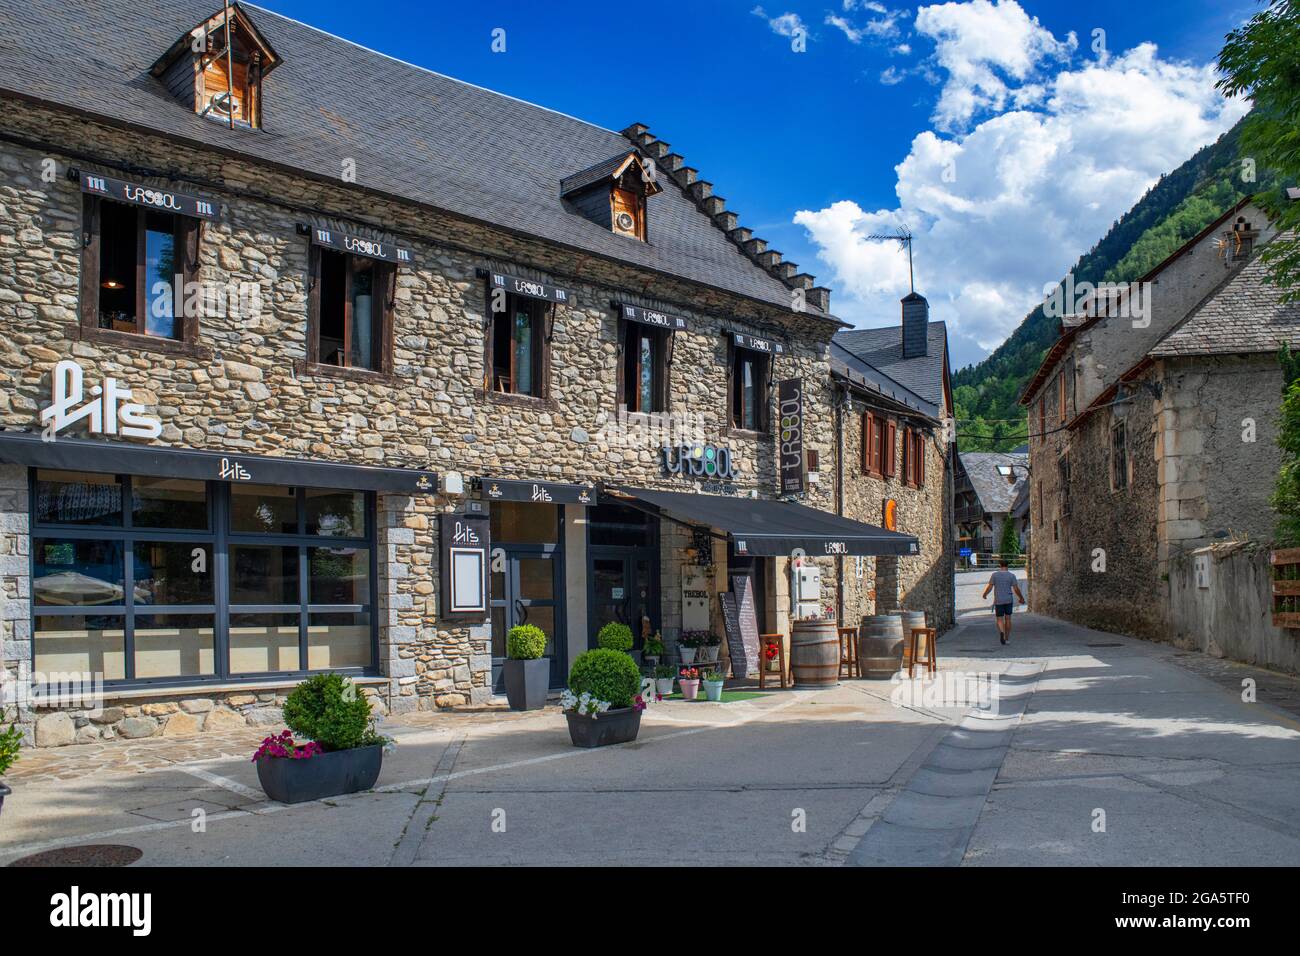 Trebol bar and restaurant in Arties village Viella, Val d'Aran, Aran Valley in Aran Valley in Pyrenees Lleida Catalonia Spain.   The town of Arties of Stock Photo